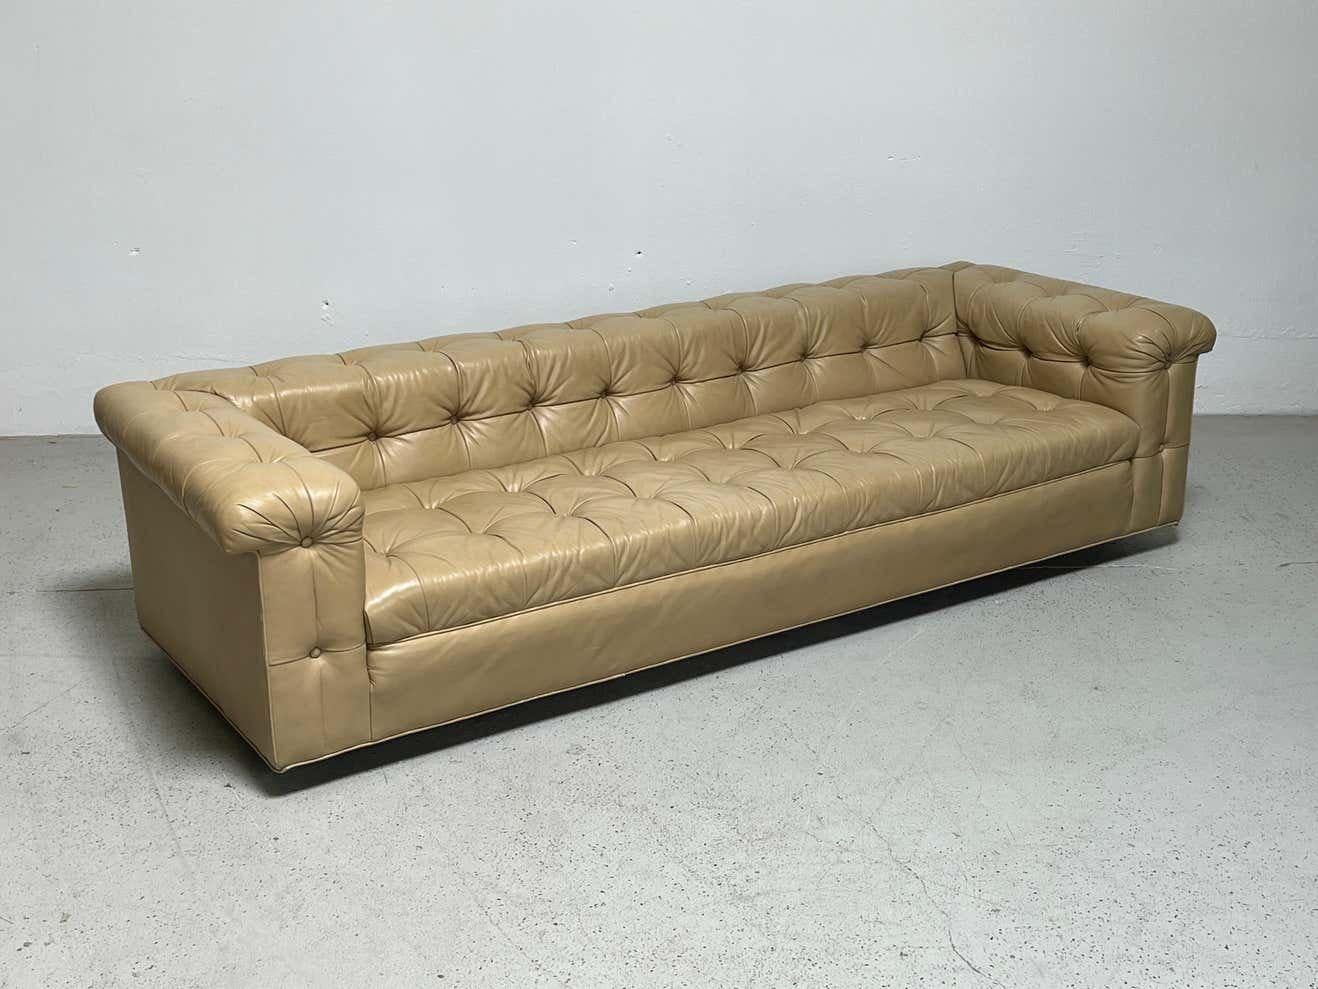 A  party sofa designed by Edward Wormley for Dunbar in original buttery soft light tan leather. Matching pair available. Priced individually. 